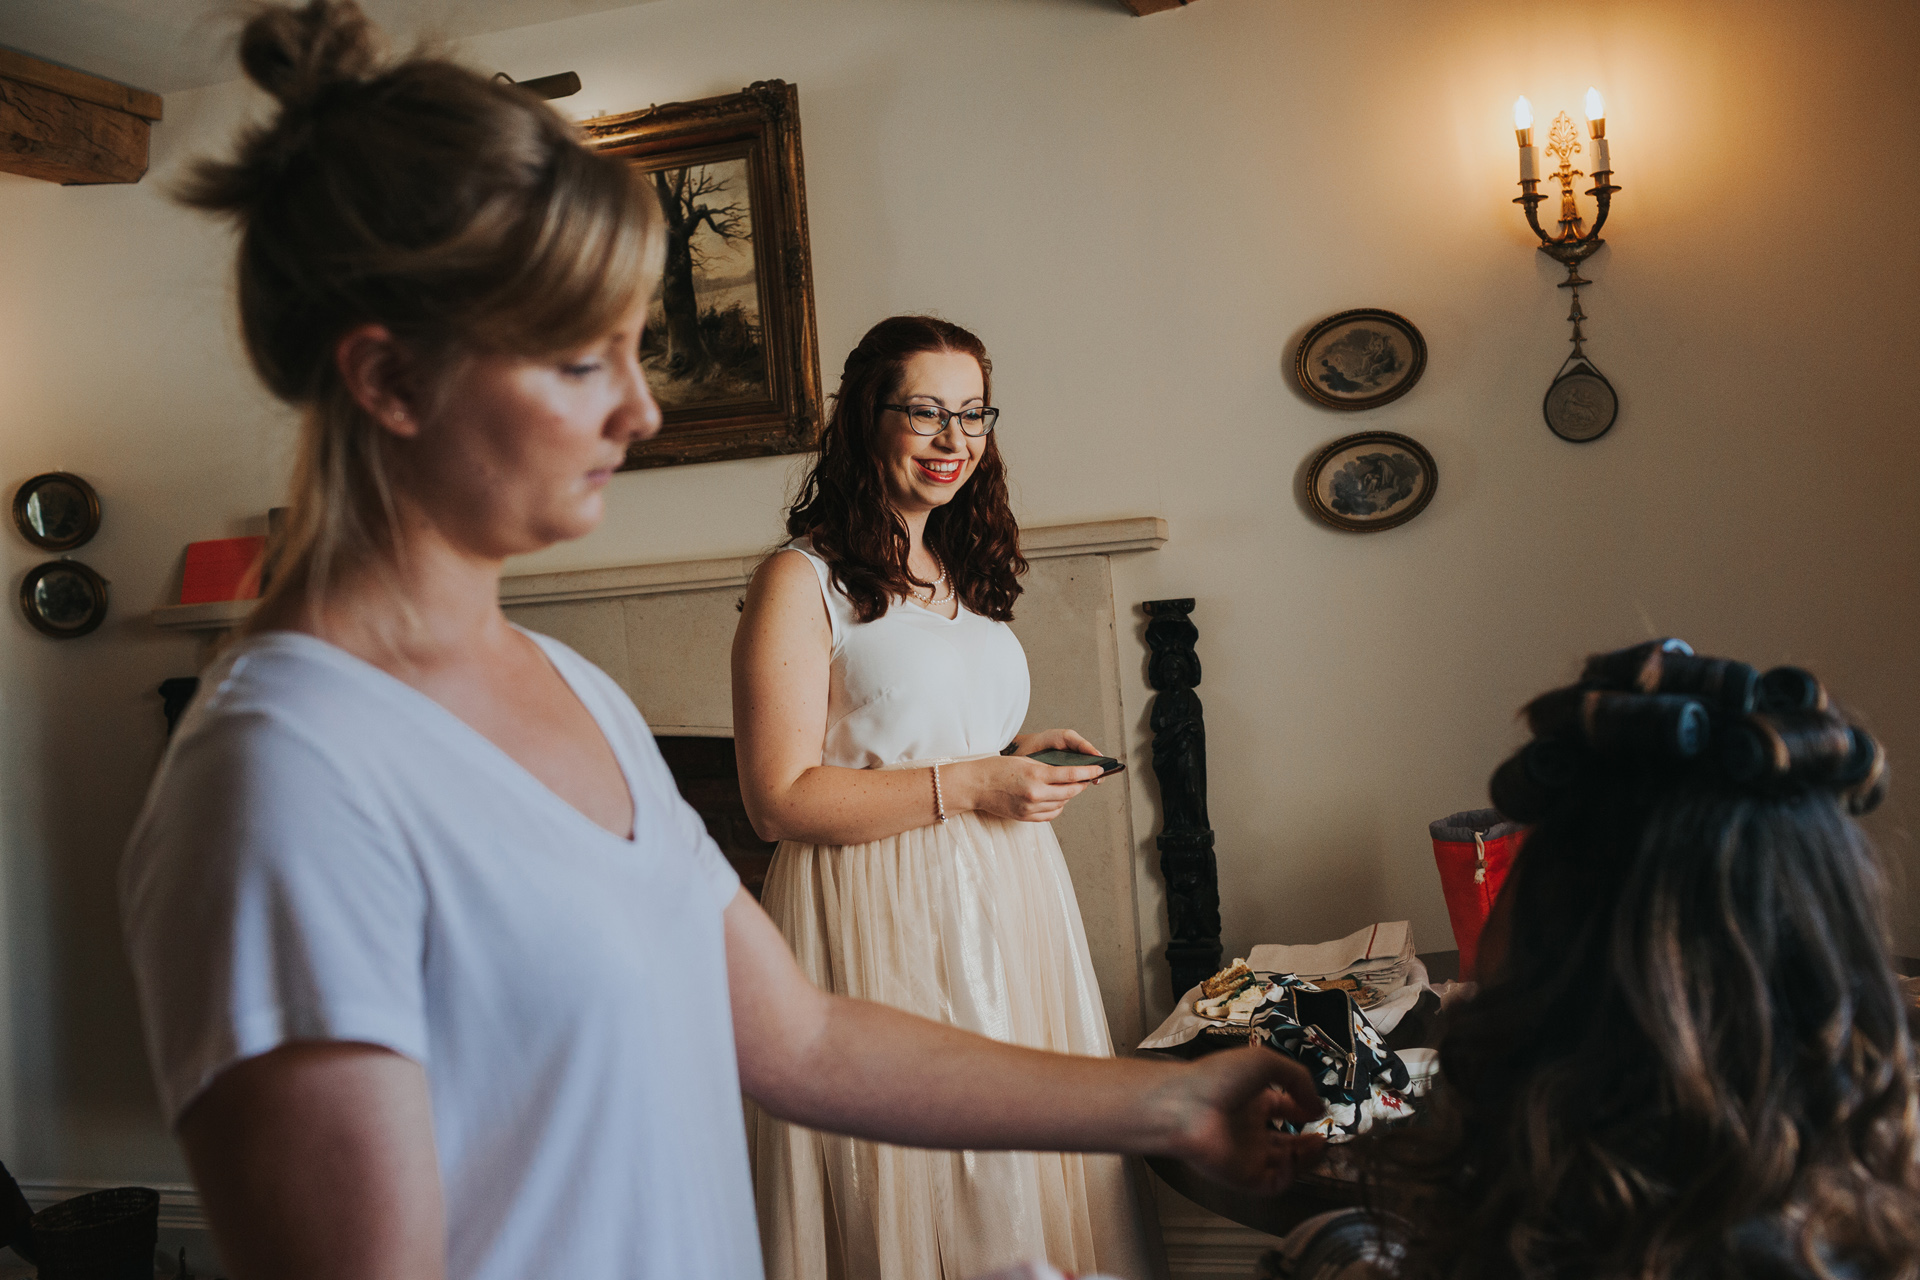 The bridesmaid looks on smiling as the bride has her finishing touches done.